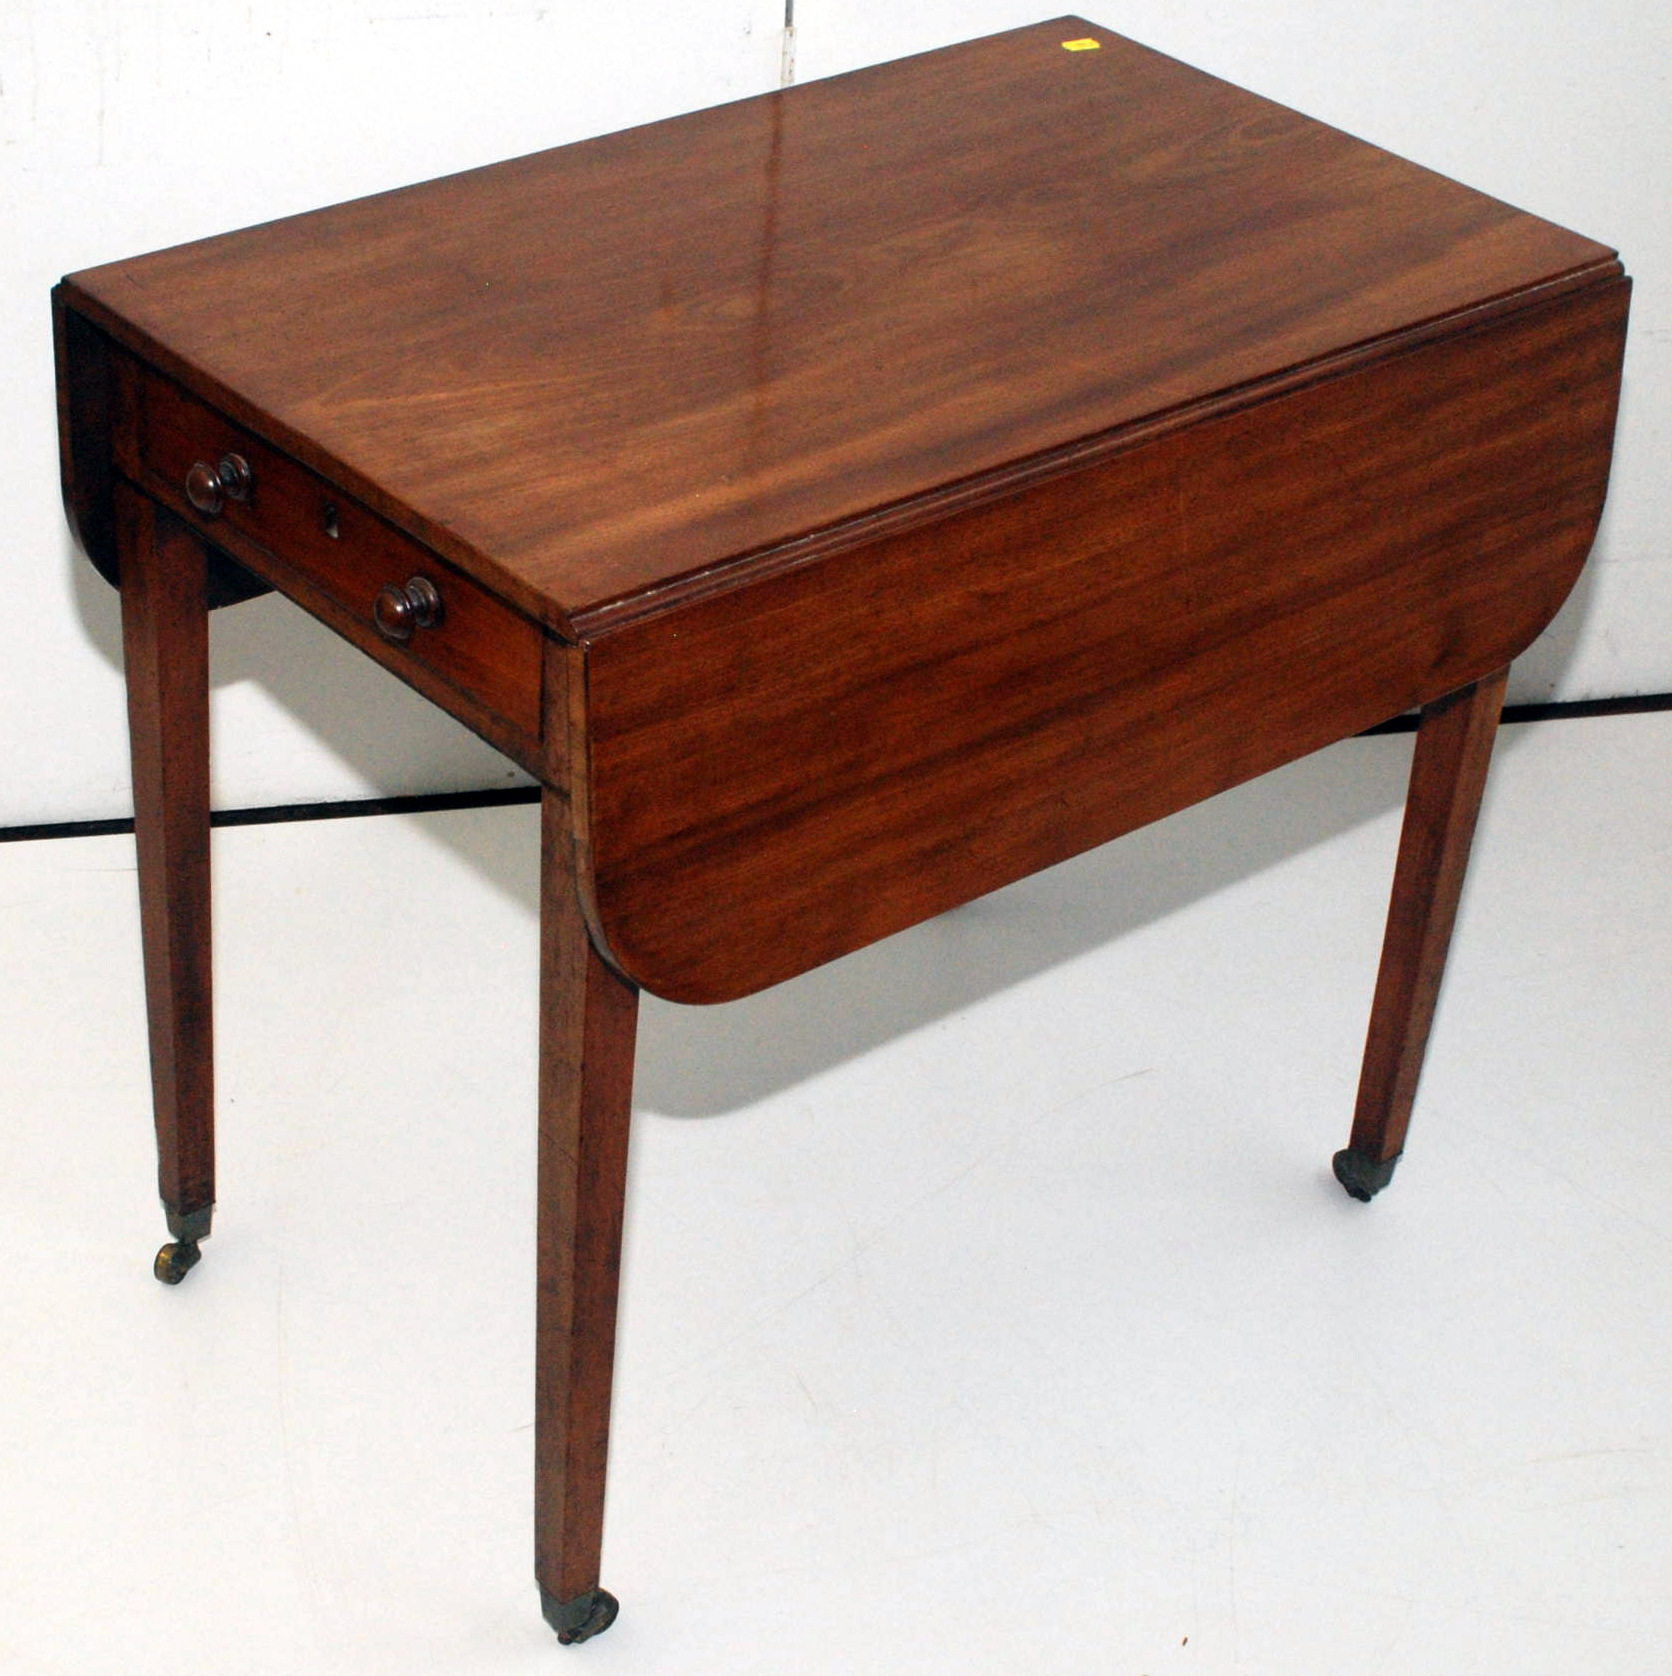 A George III mahogany Pembroke table with tapering square section legs.